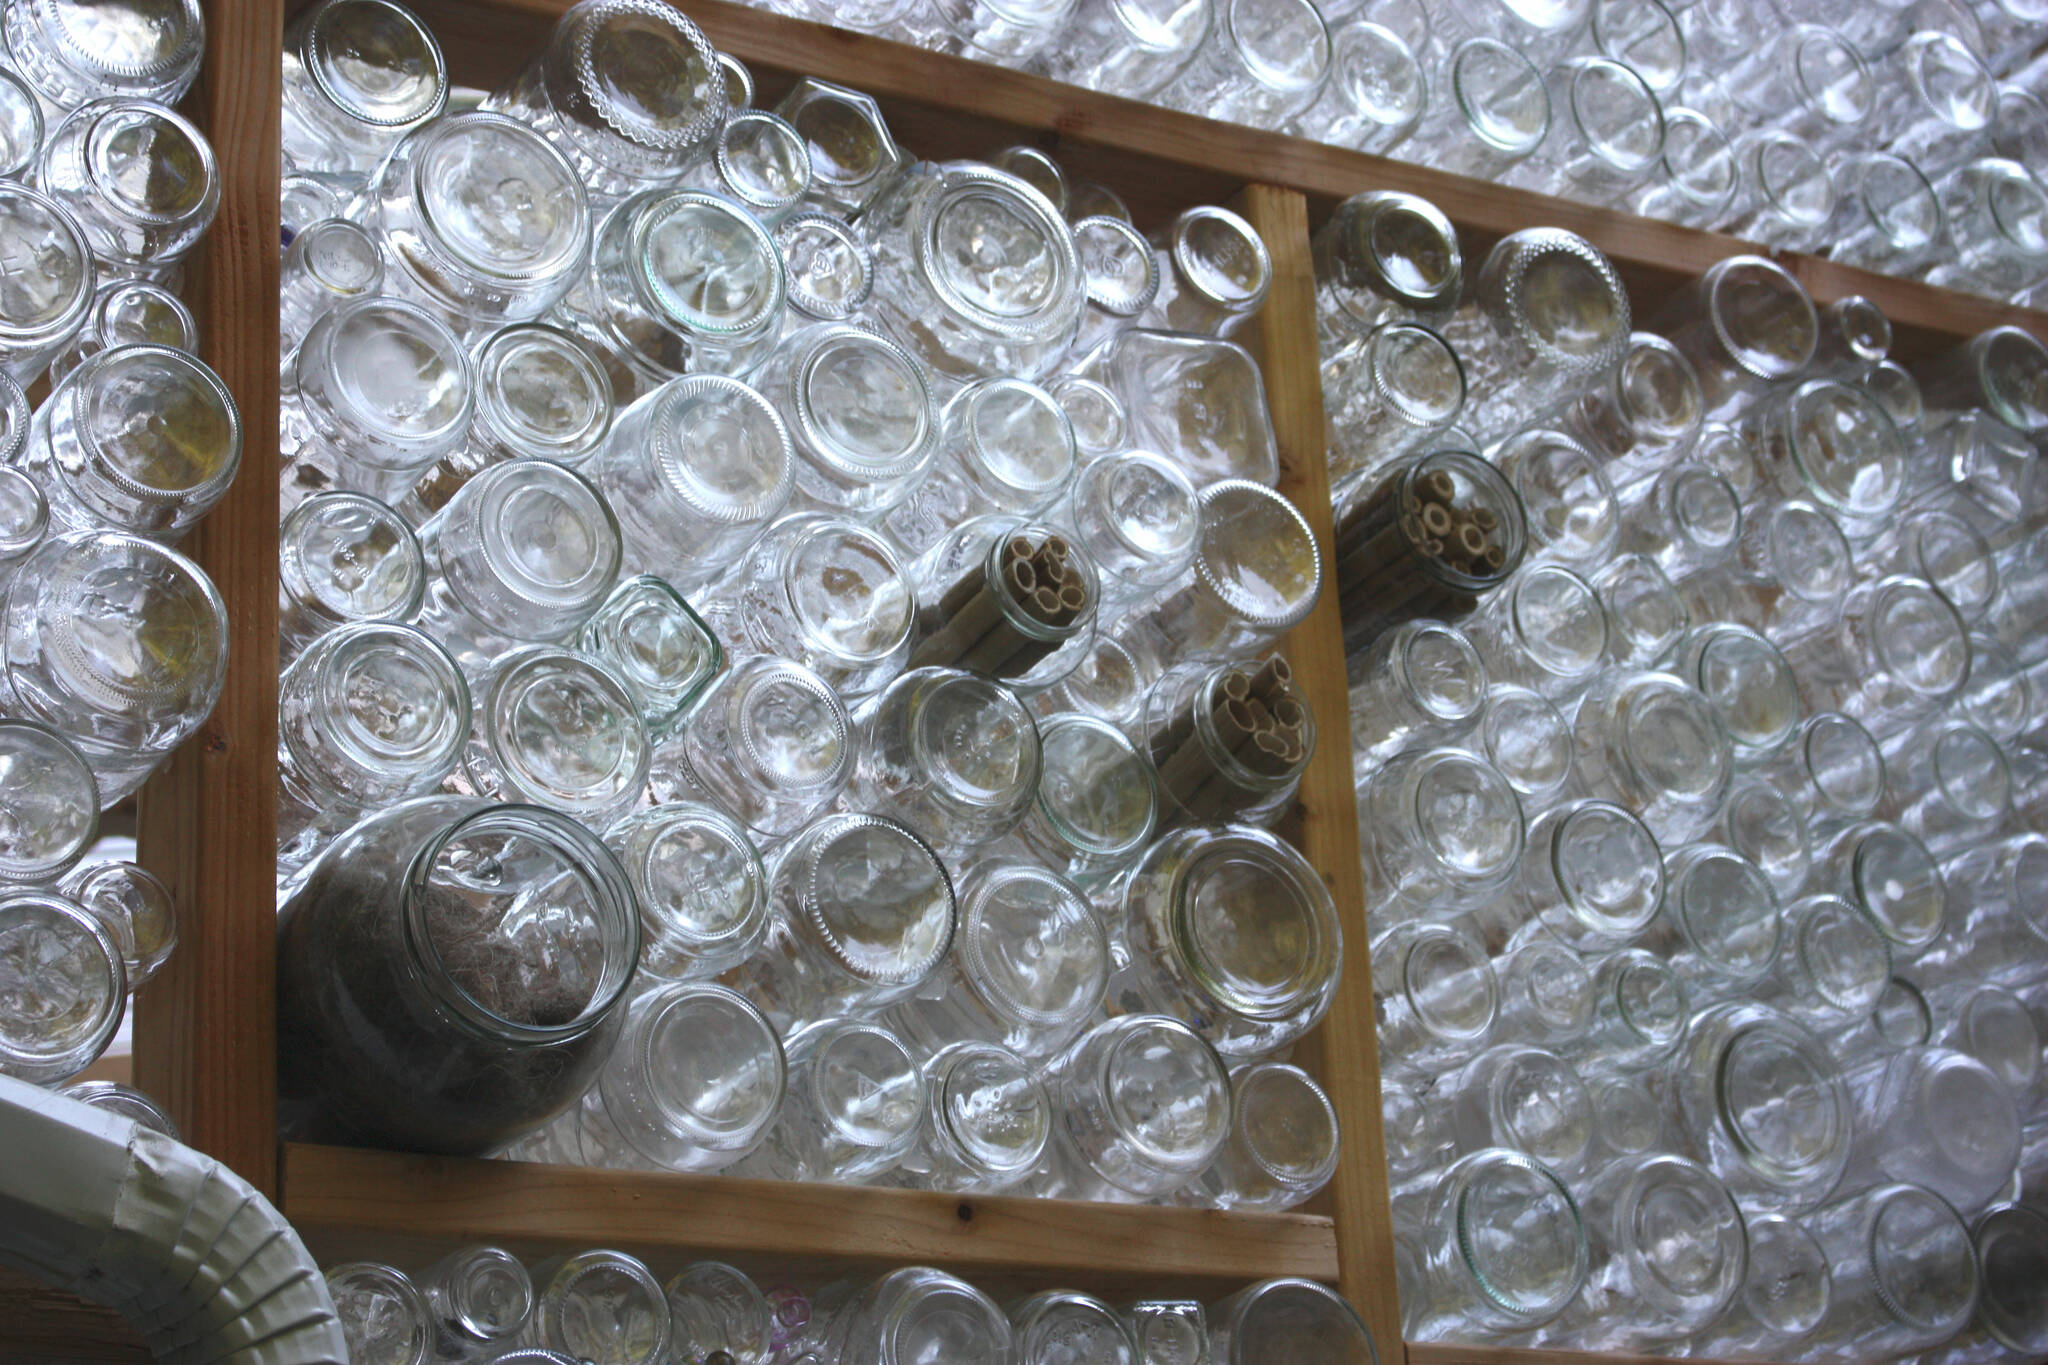 Some jars have materials to encourage birds and pollinating insects to nest in them. (photo by Cameron Sheppard)